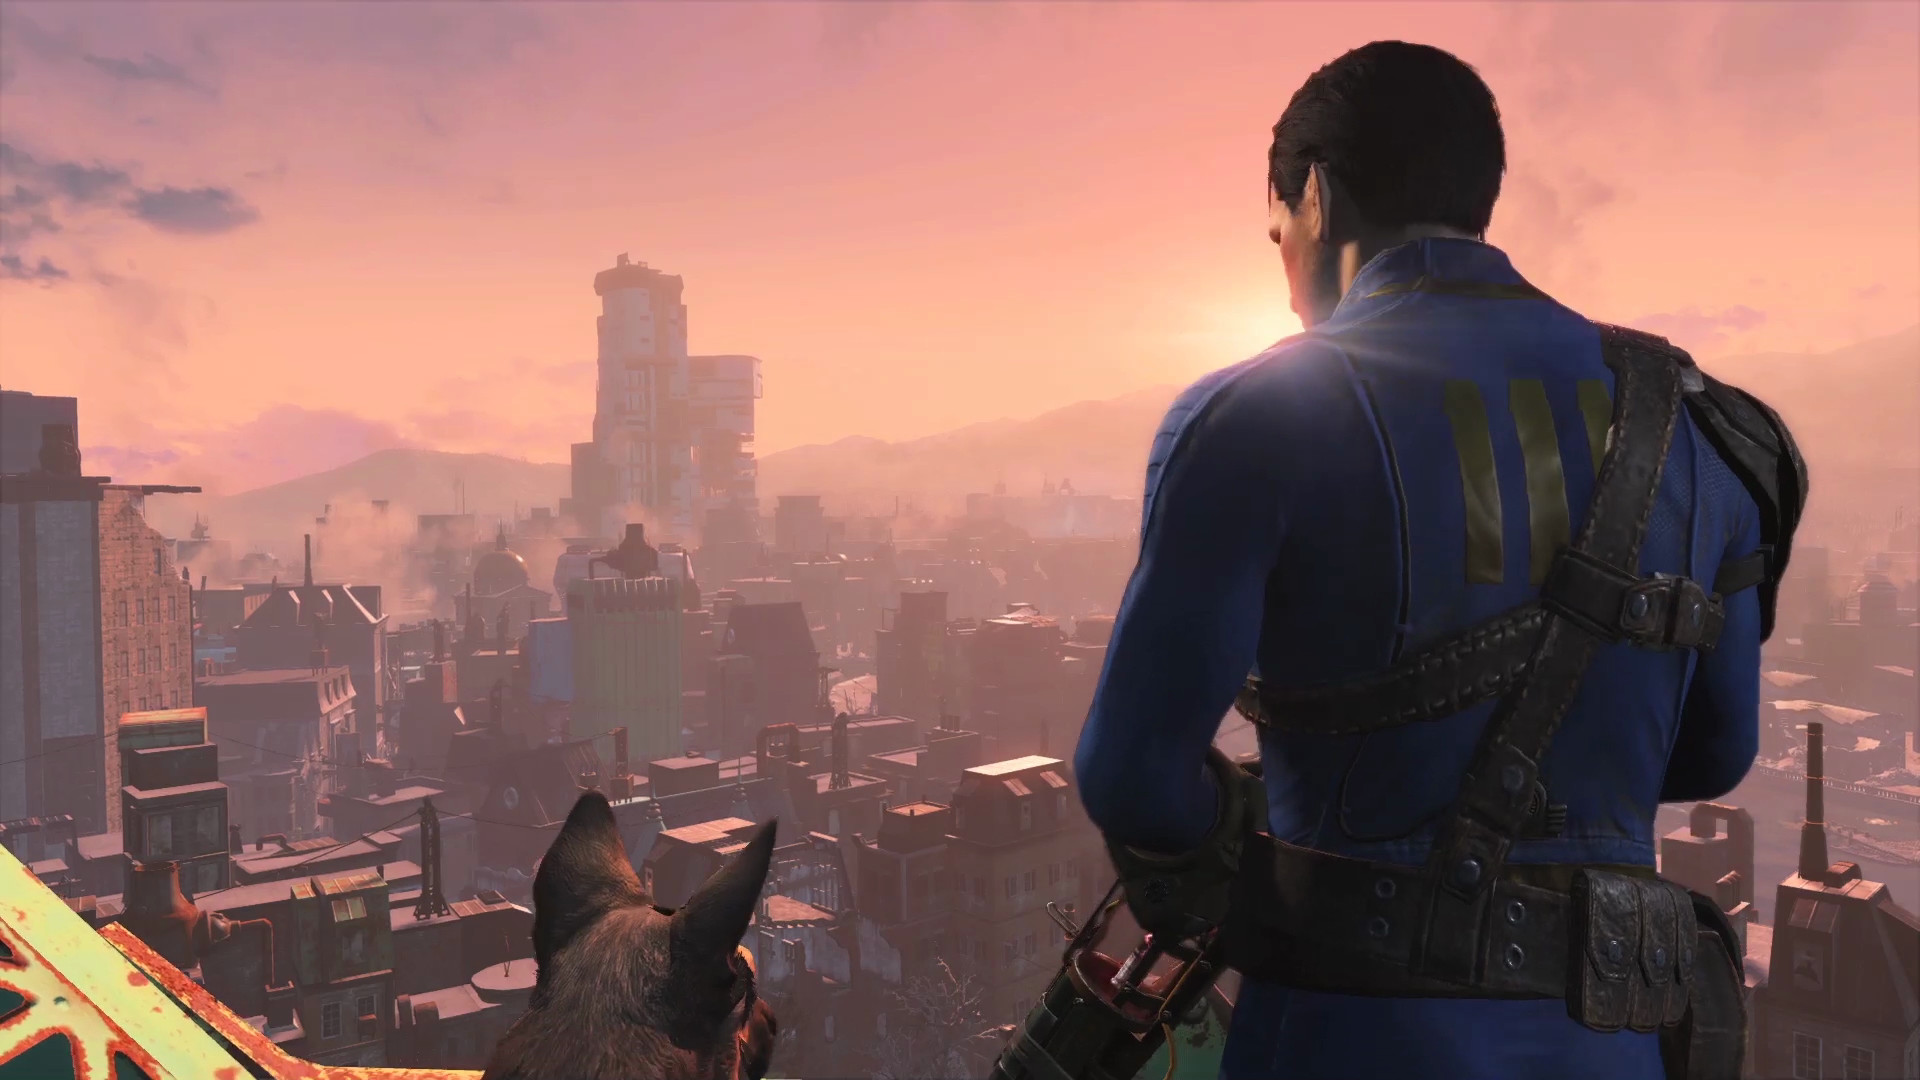 HD Wallpaper Background ID664388. Video Game Fallout 4